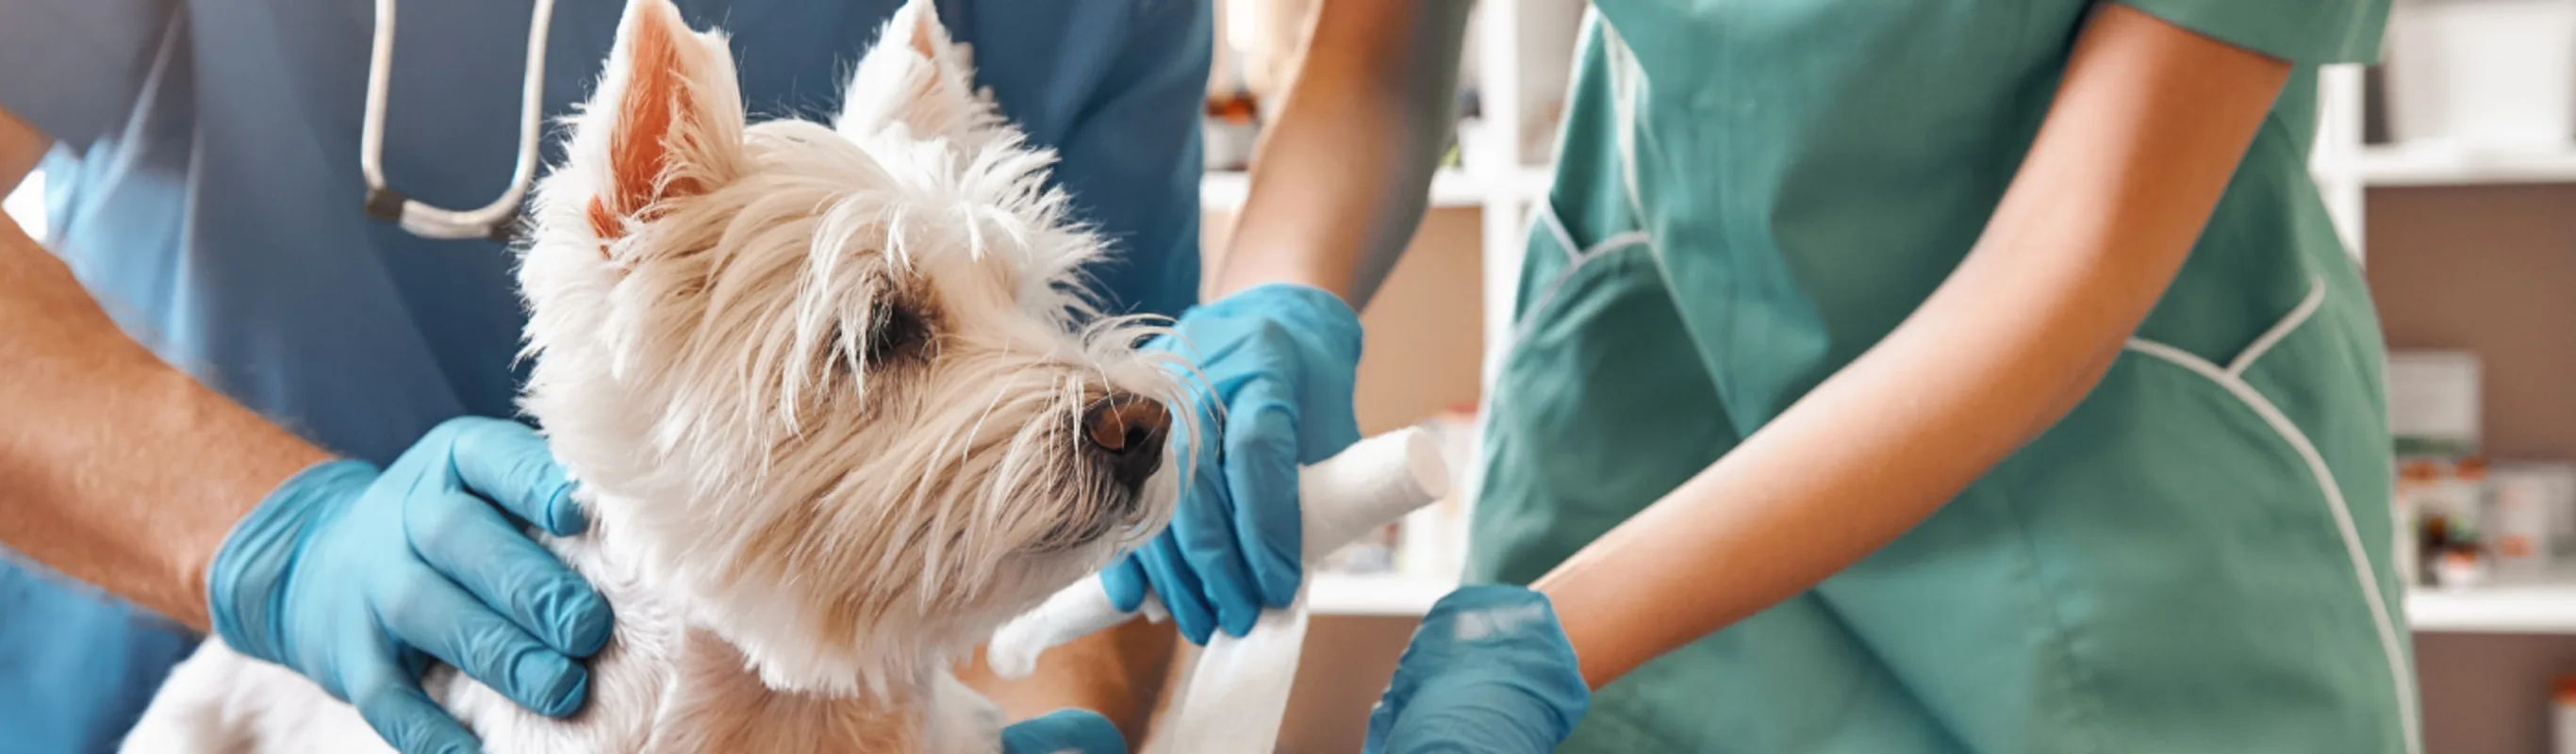 Veterinarians wrapping up the leg of a small, white dog